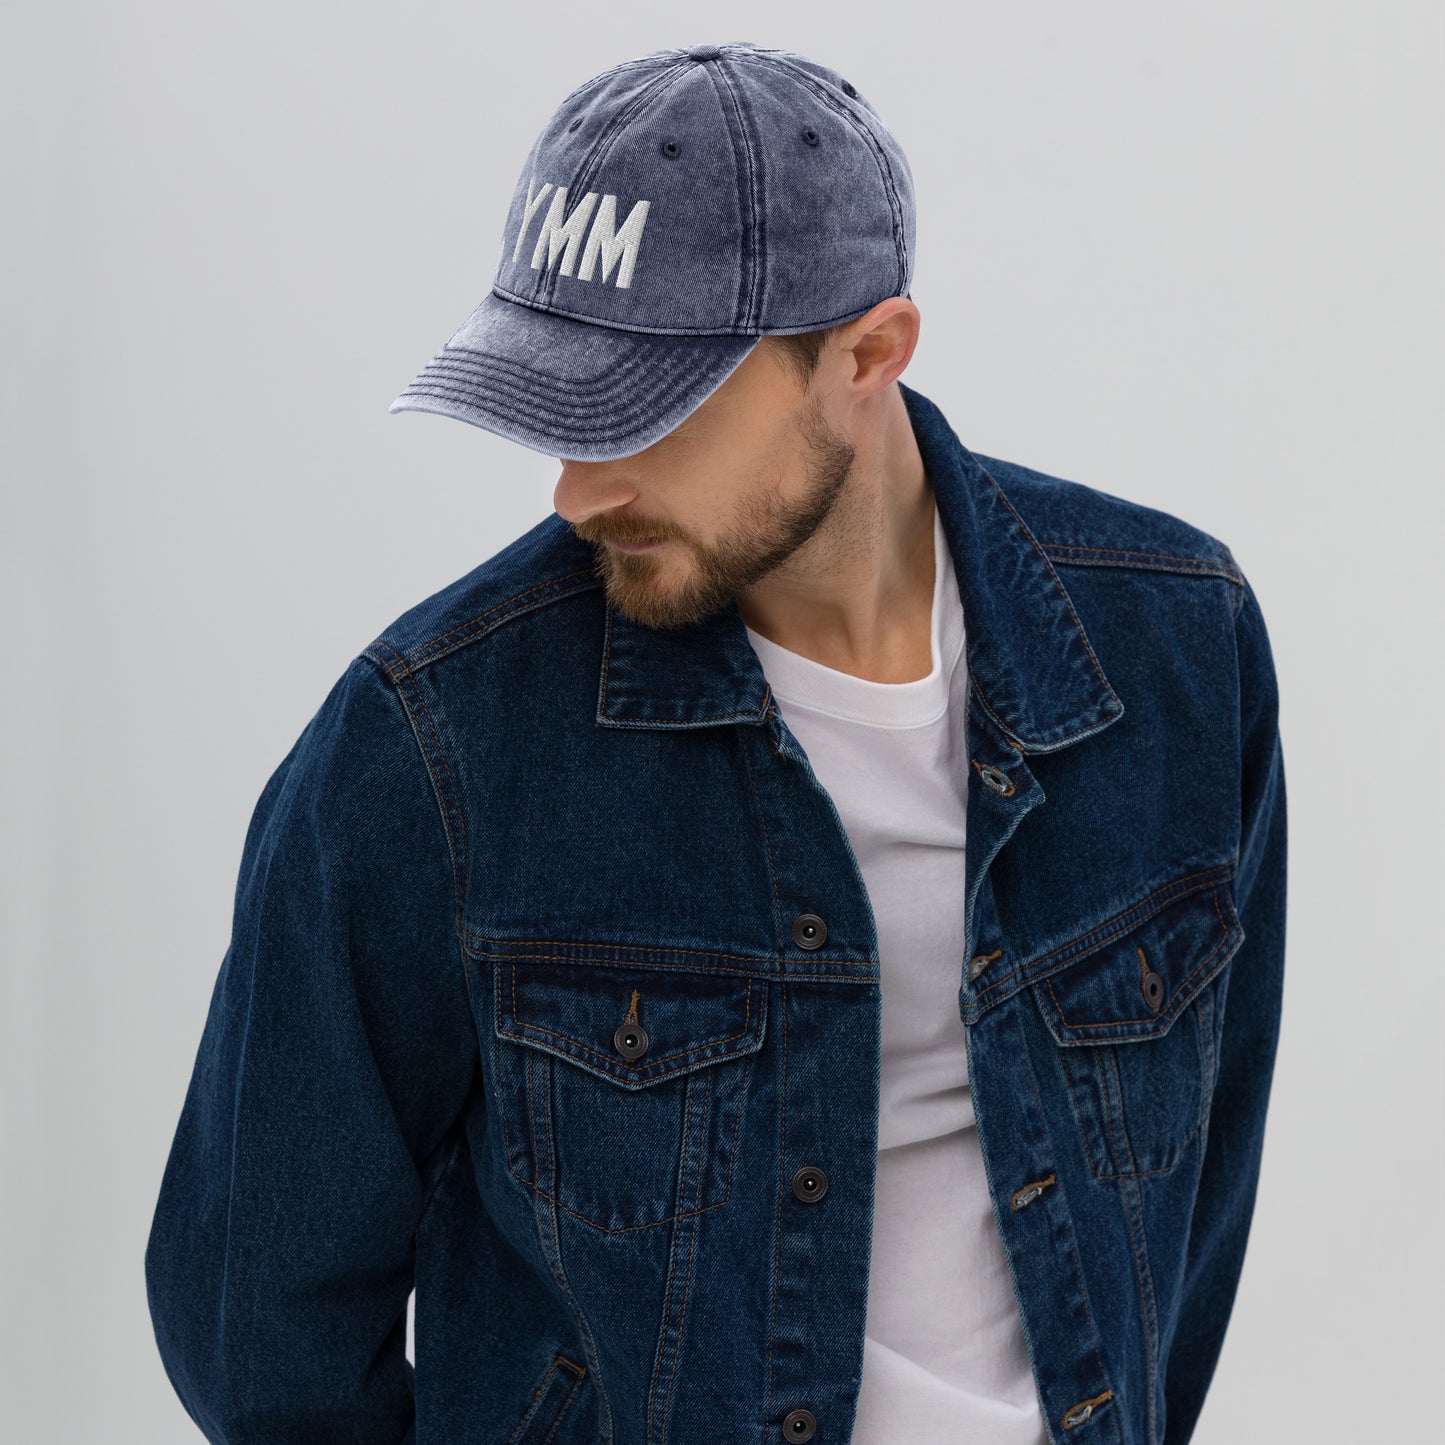 Airport Code Twill Cap - White • YMM Fort McMurray • YHM Designs - Image 03